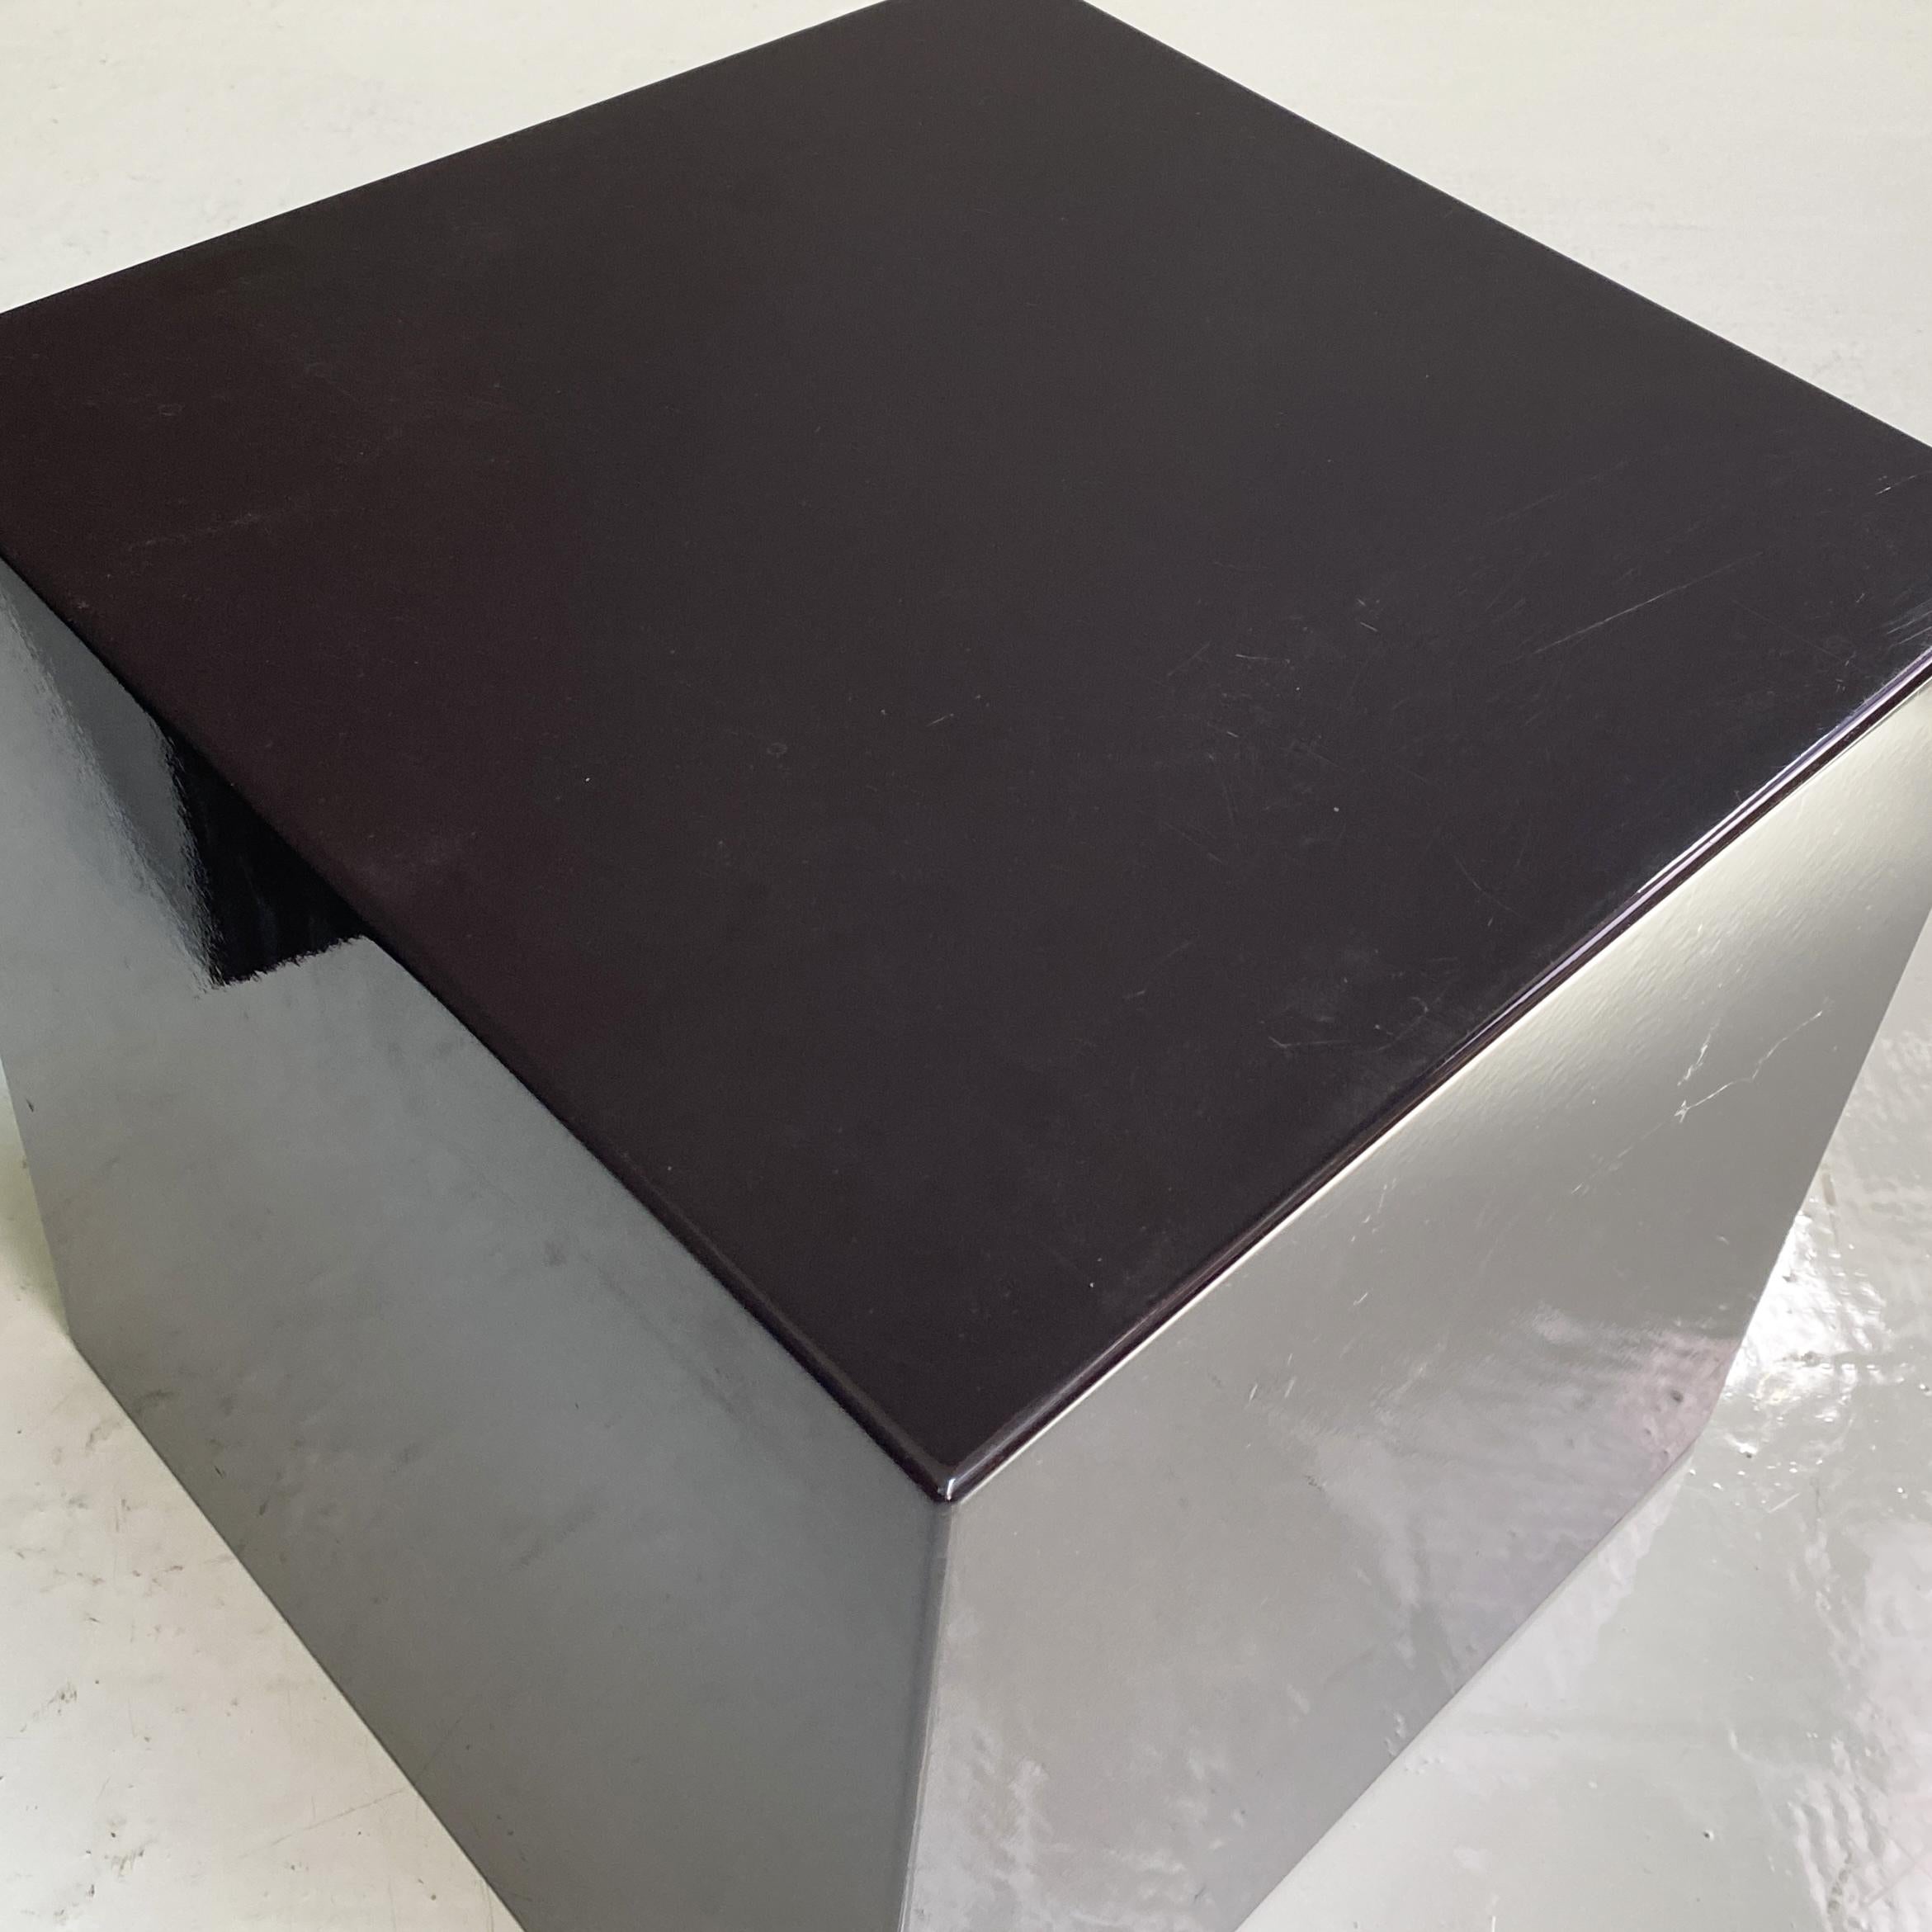 Cube-Shaped Coffee Tables or Bedside Tables in Dark Brown Lacquered Wood, 1990s  For Sale 5